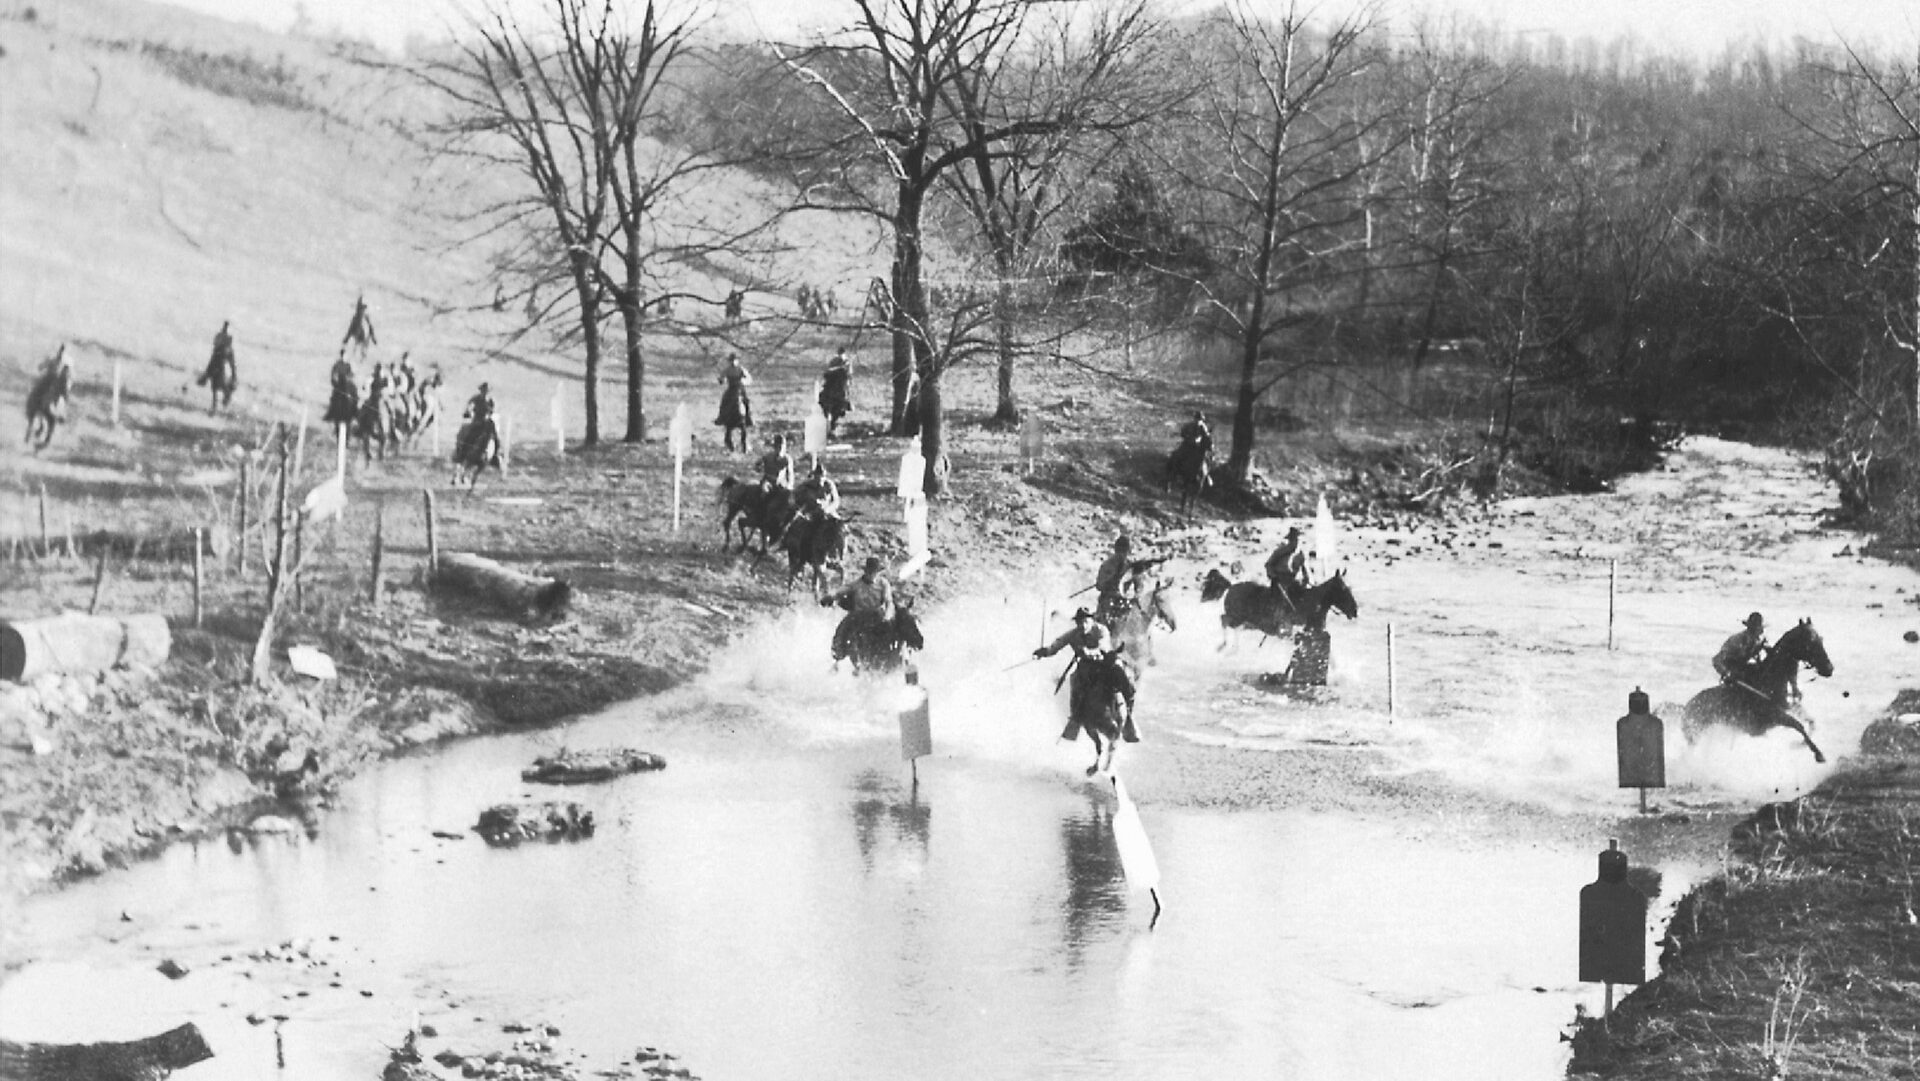 Cadets of the Virginia Military Institute urge their horses across a wintry stream.